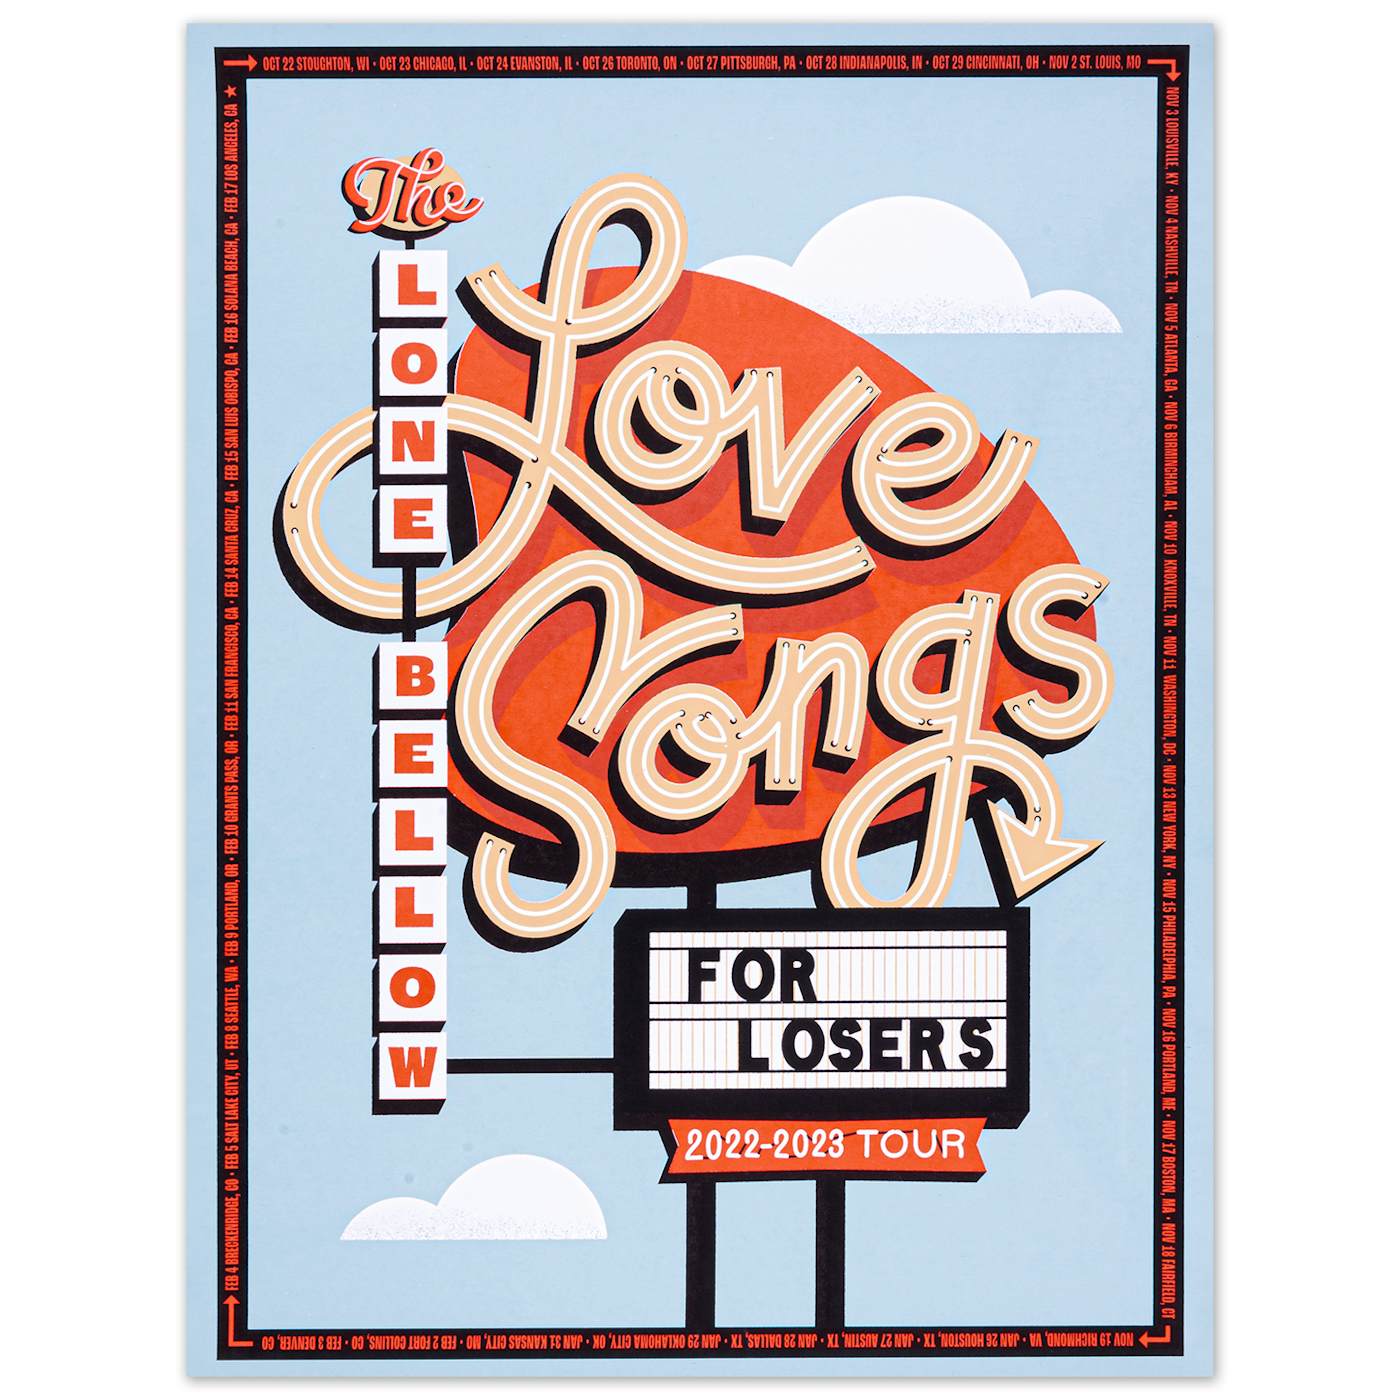 The Lone Bellow Love Songs for Losers ’22-’23 Tour Poster Day